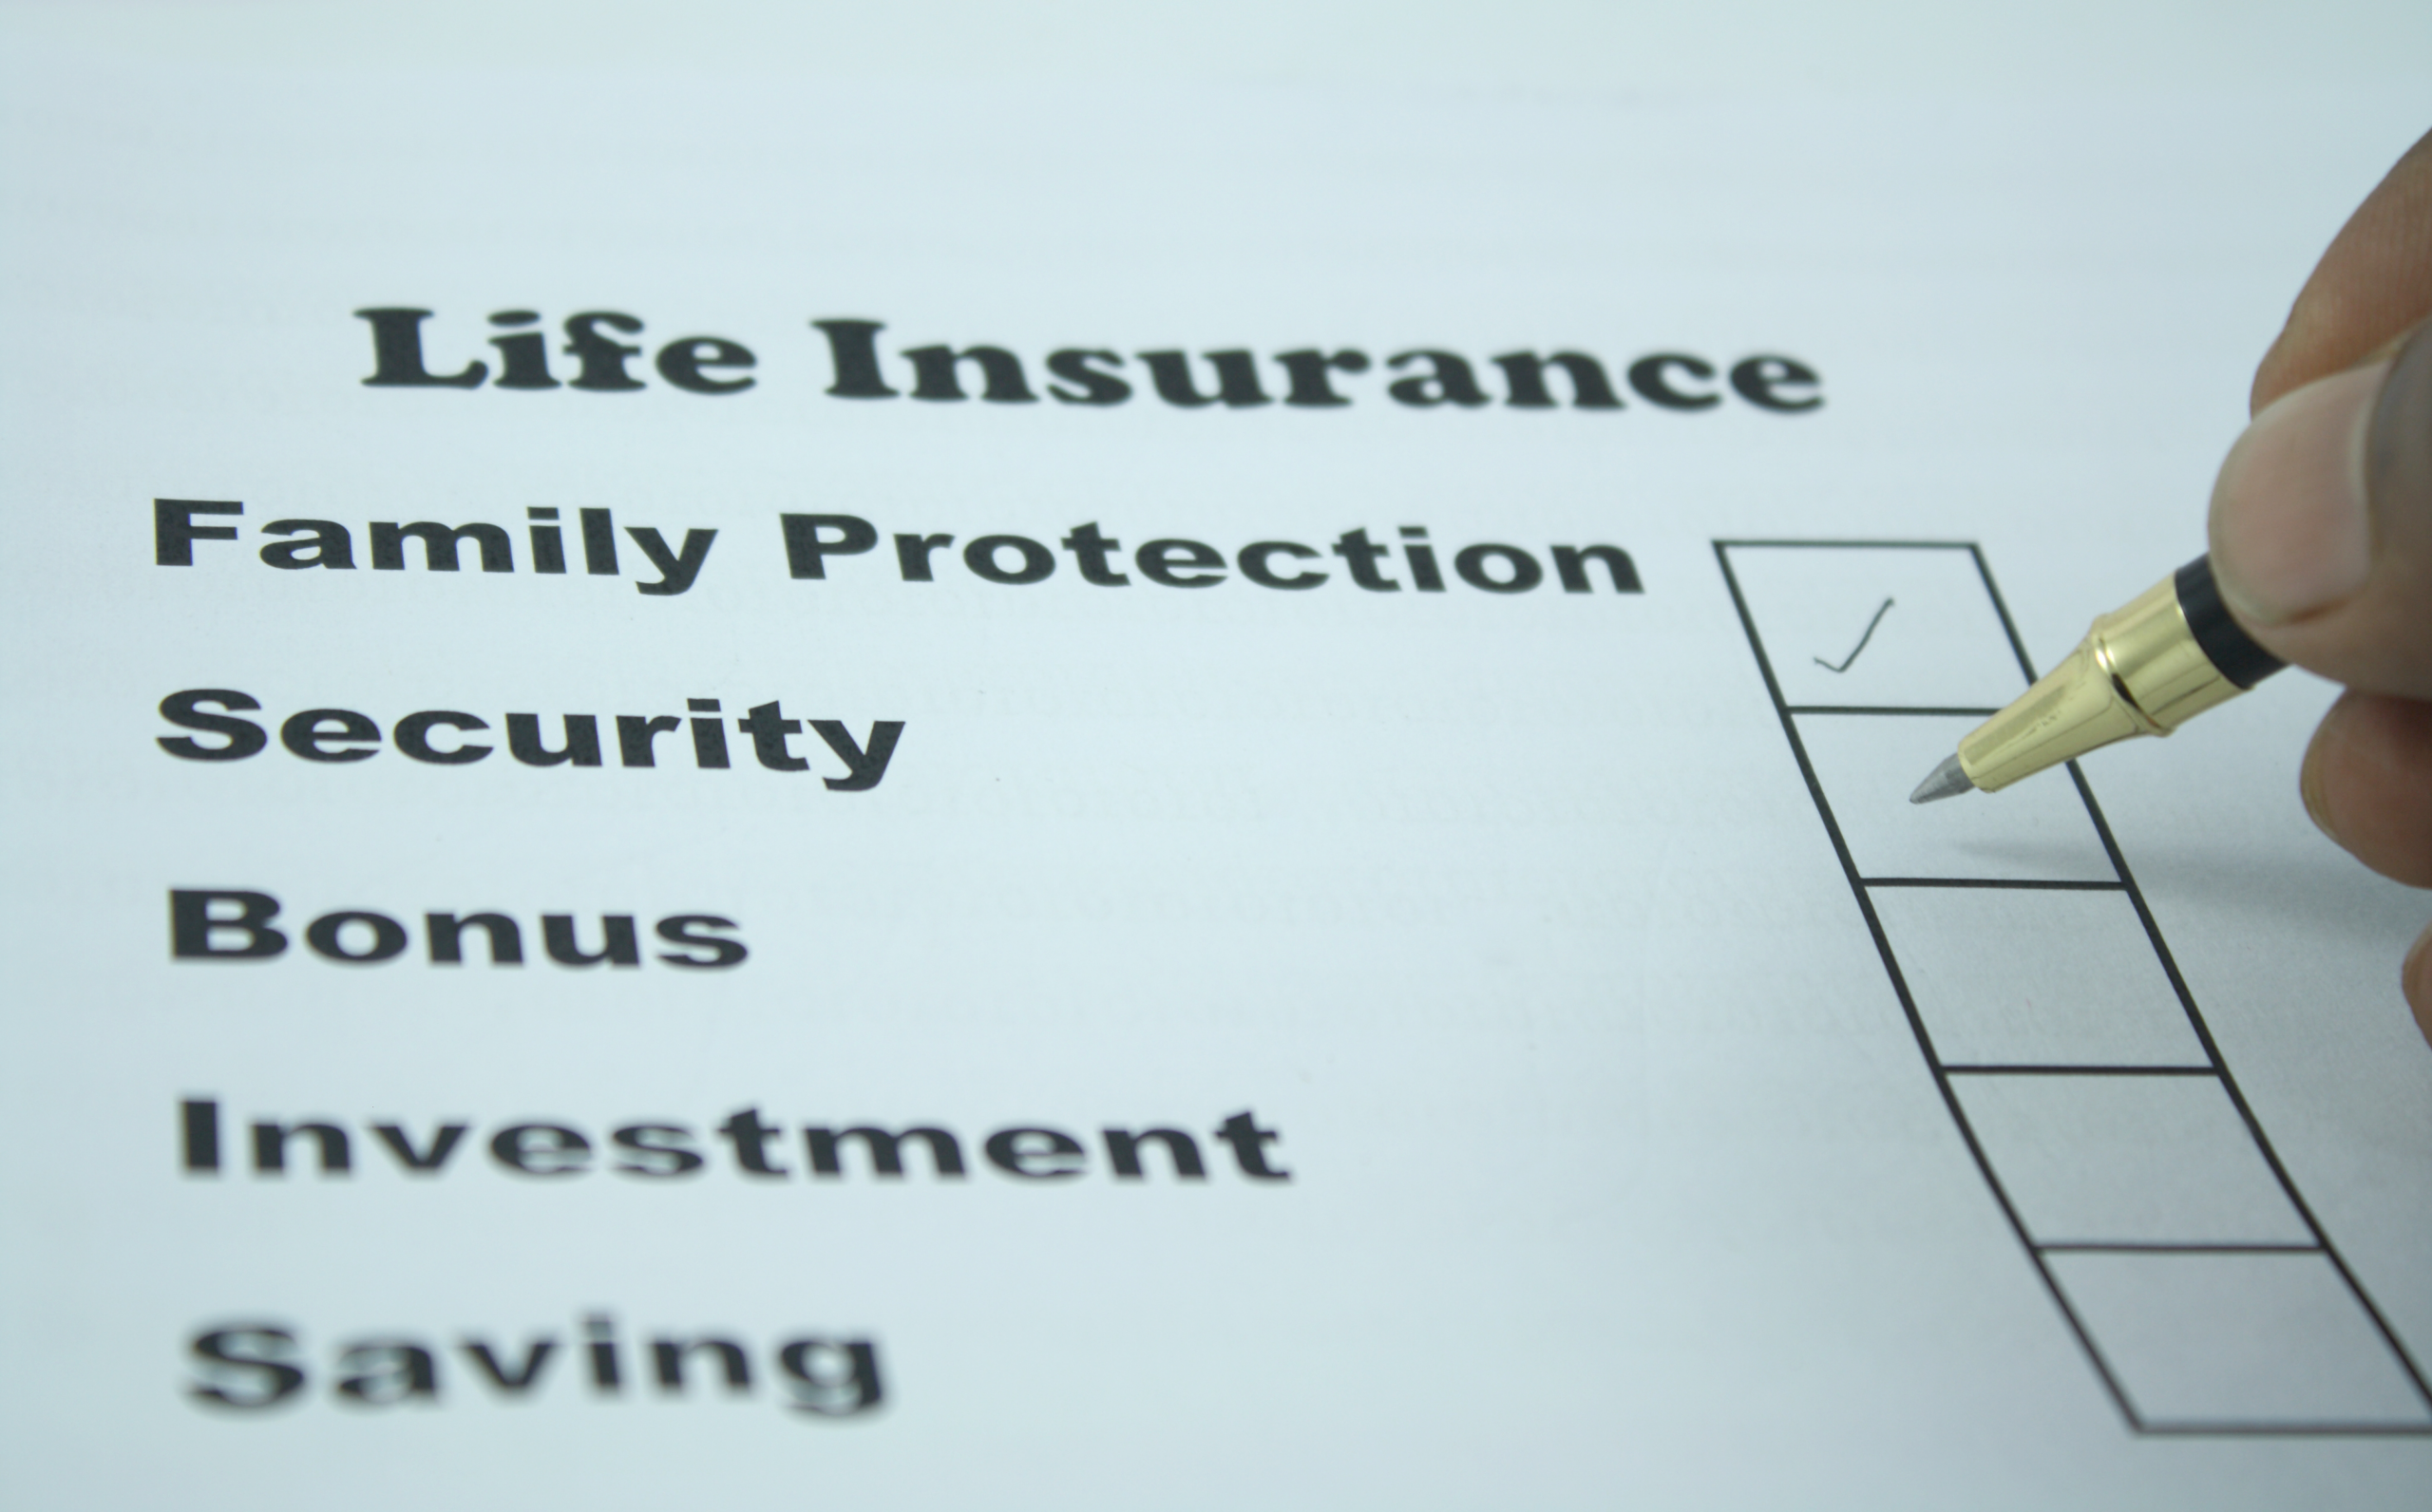 $400,000 term and whole life insurance